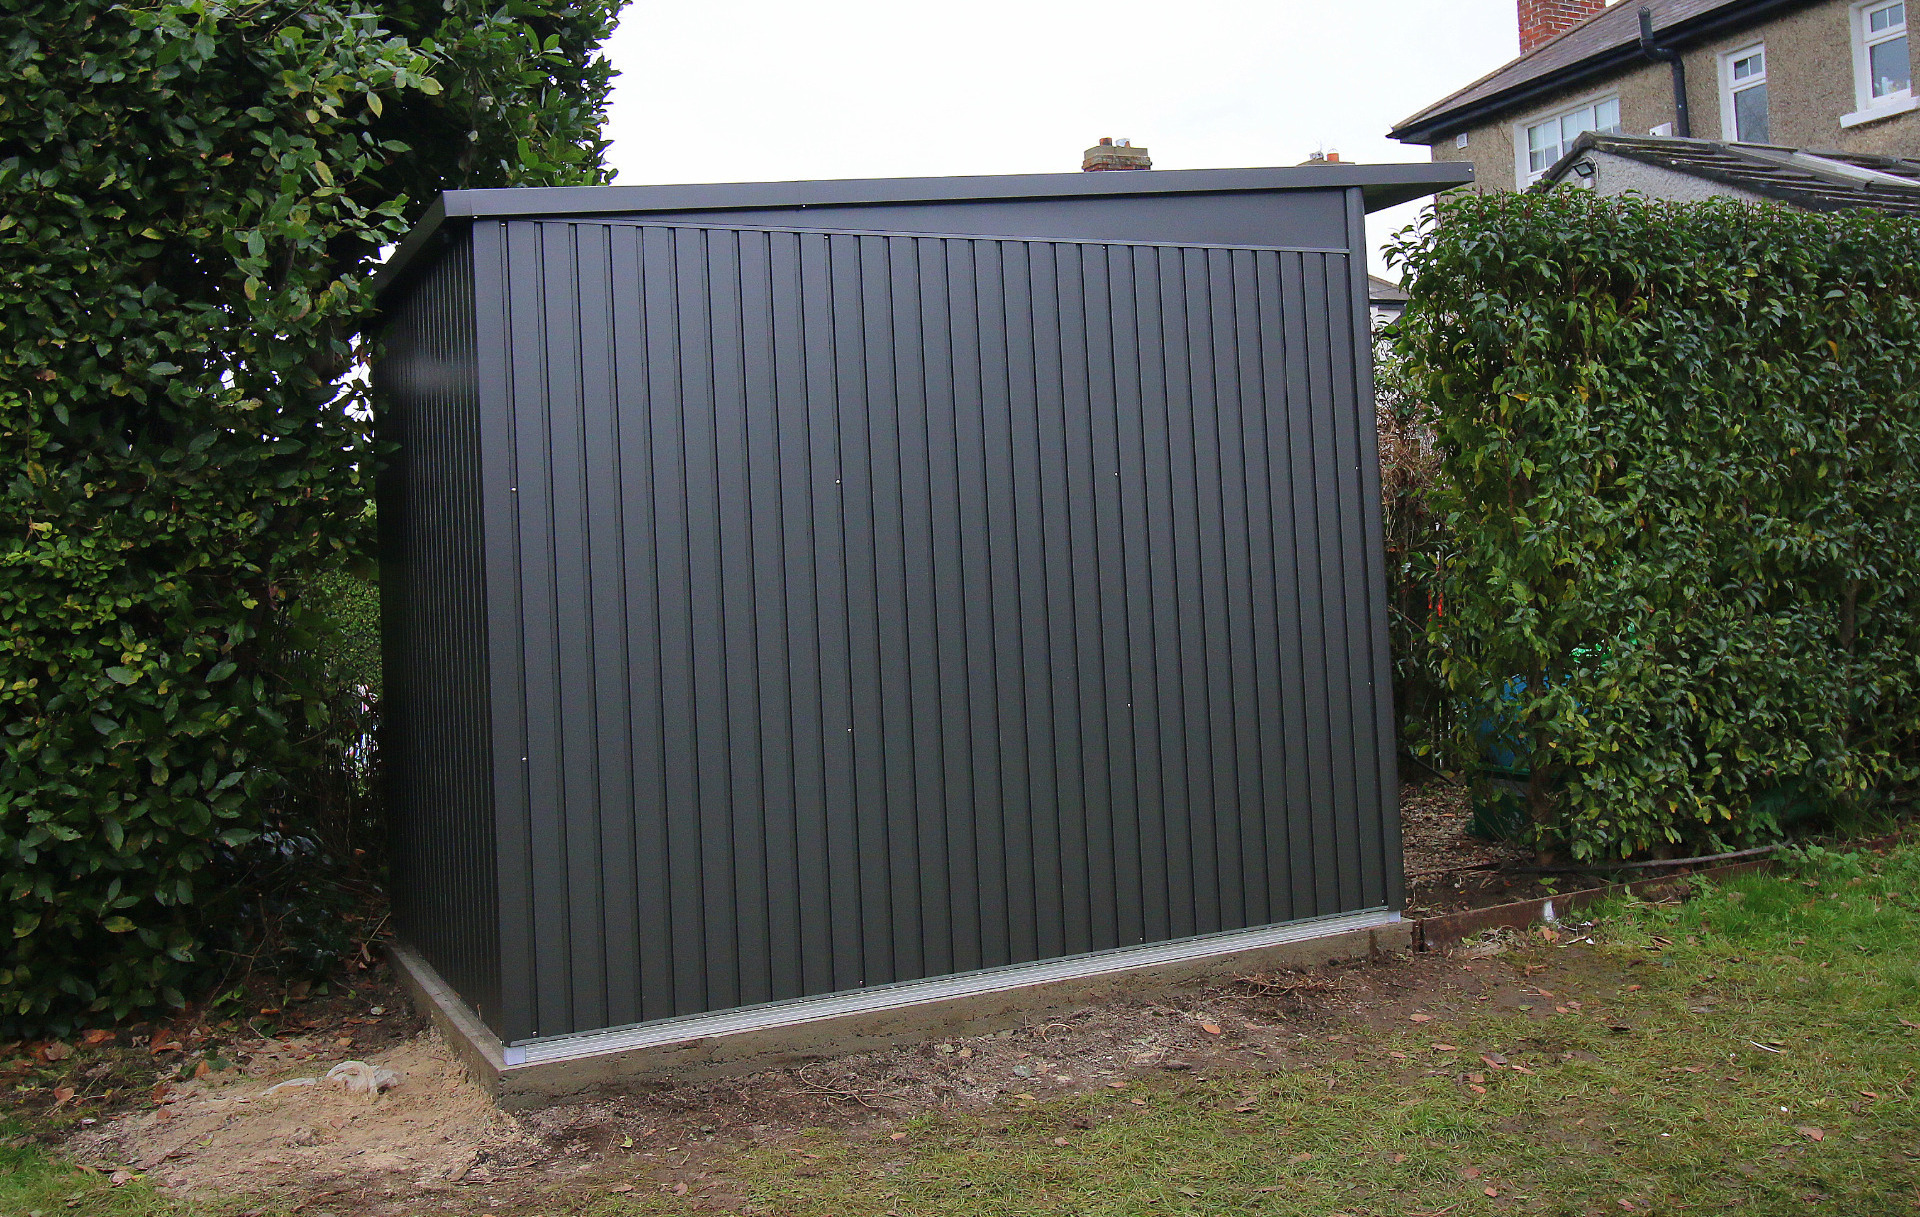 Biohort AvantGarde A3 Garden Shed  | Stylish, rugged and no maintenance | Supplied + fitted in Dublin 3 | Pay less for Biohort at Owen Chubb GardenStudio, Tel 087-2306 128